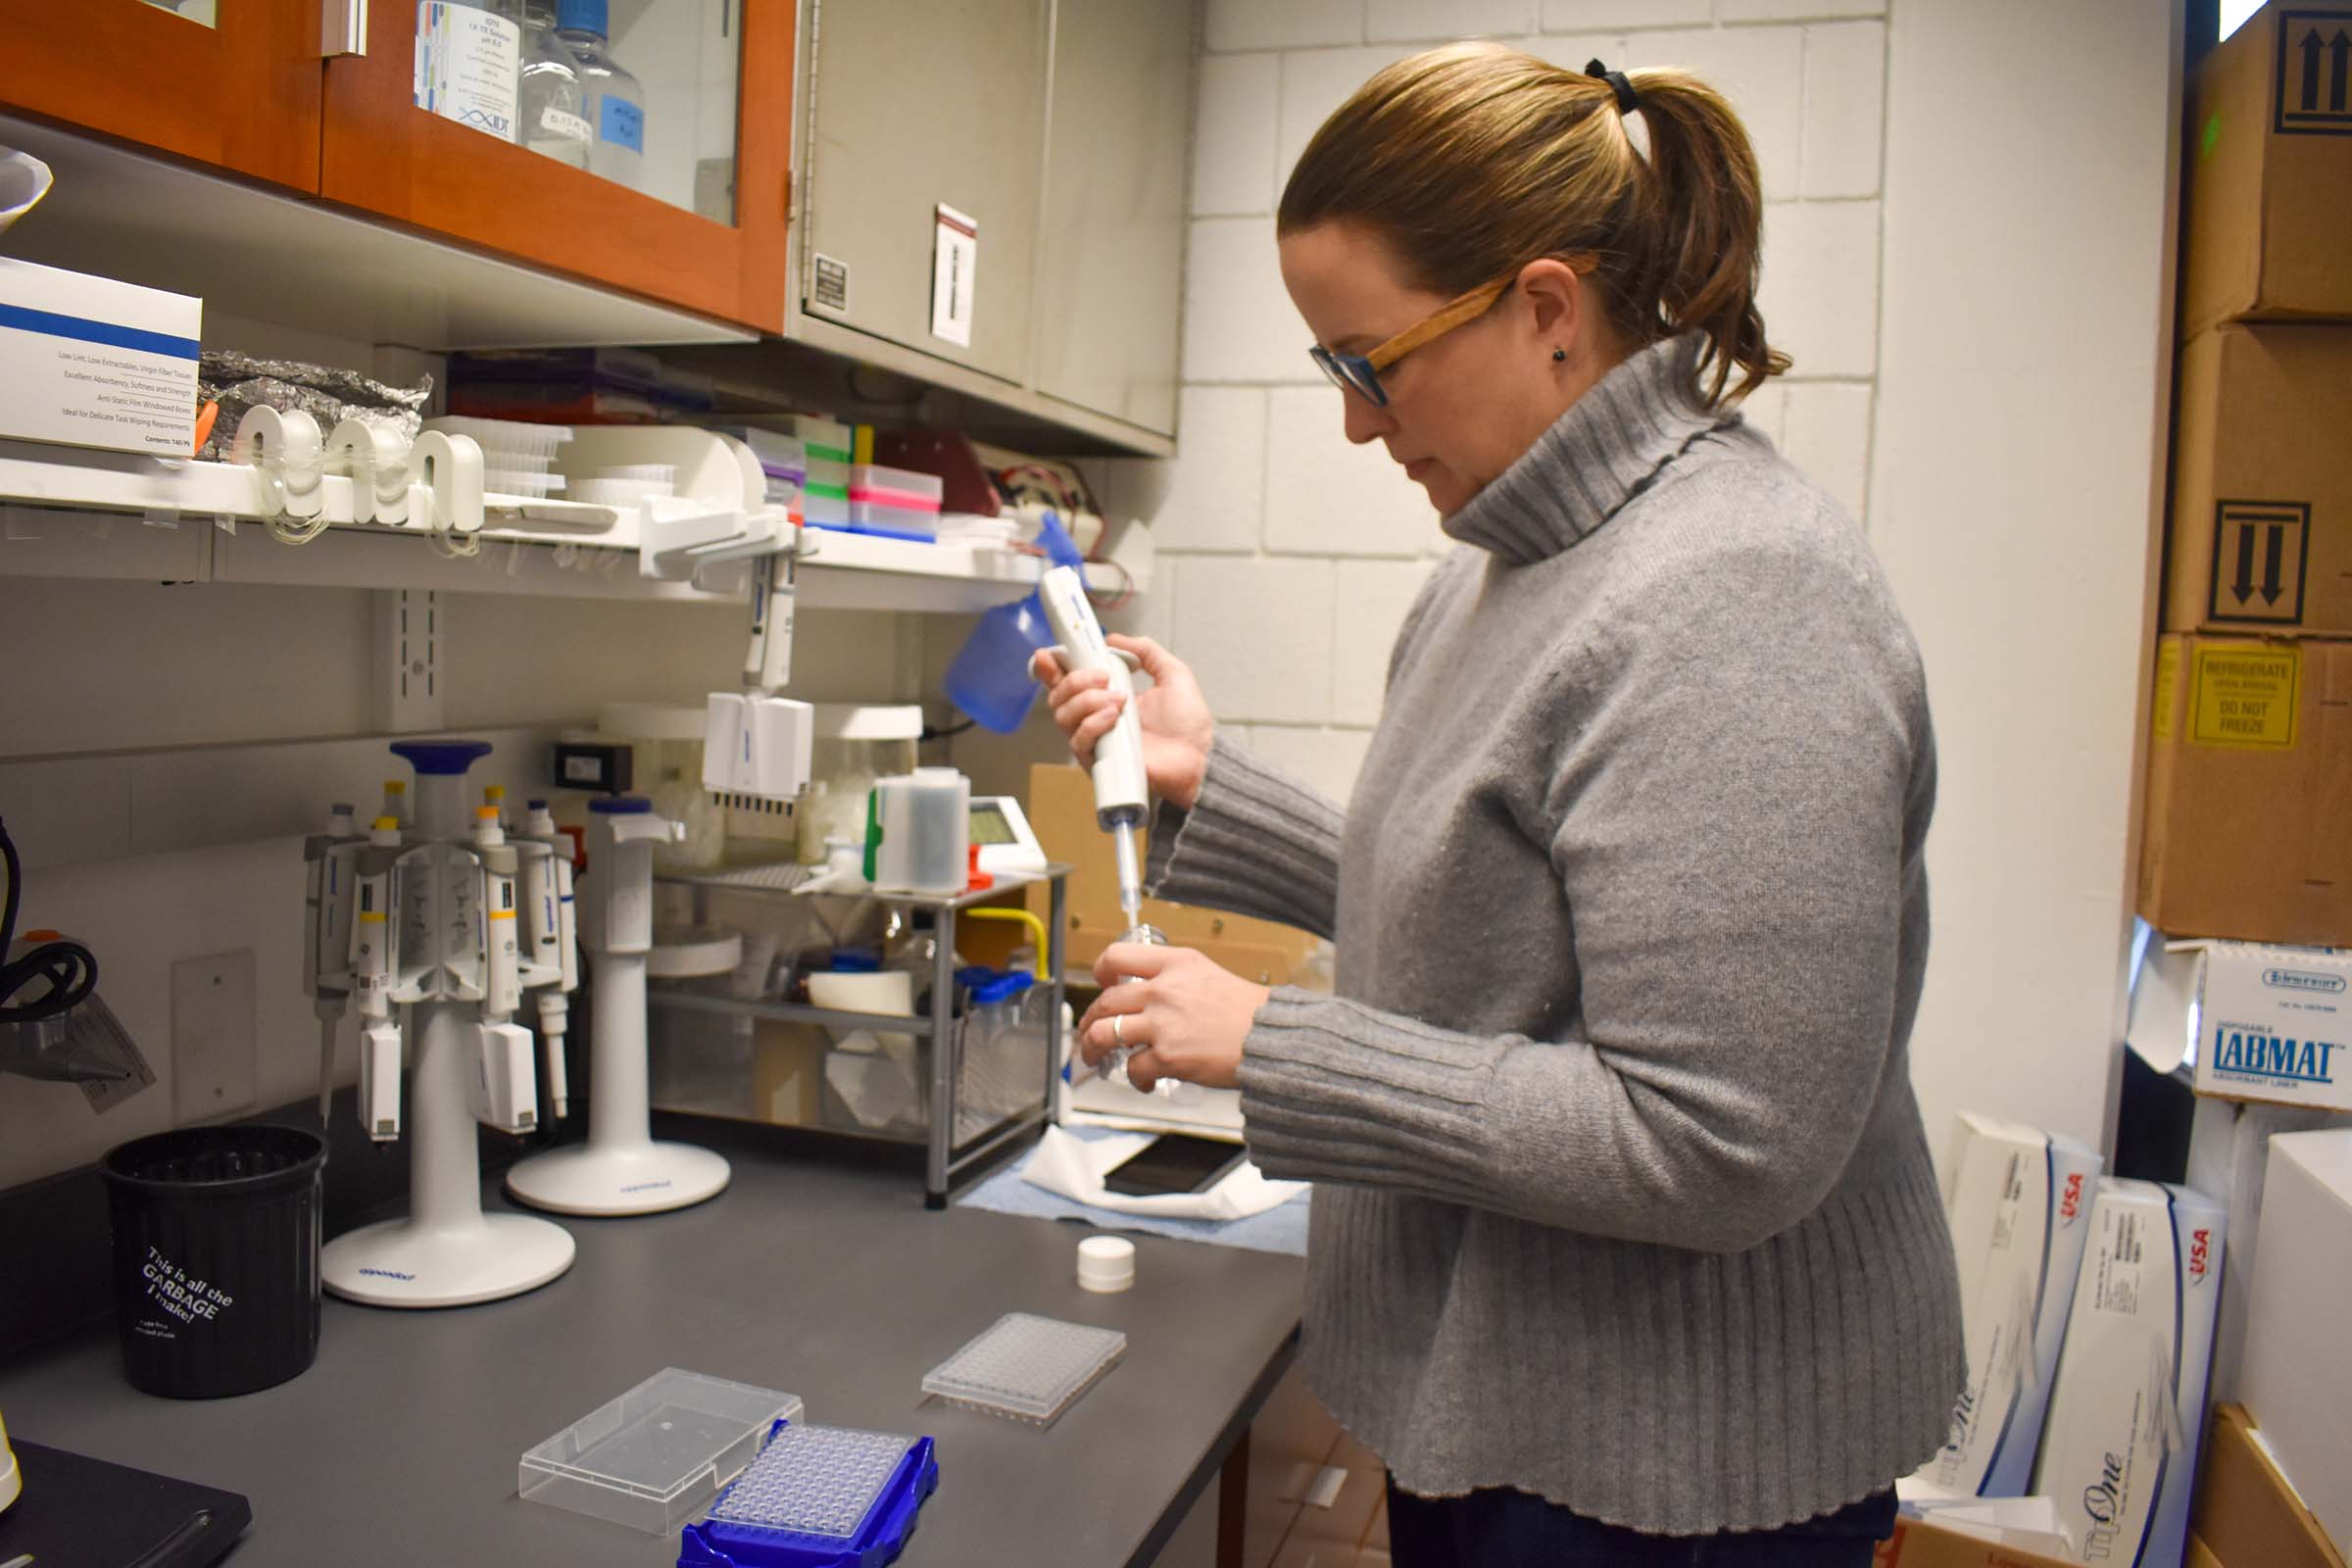 Elizabeth Thiele wearing a gray turtleneck sweater, standing in a lab and holding a large syringe in a glass vial.